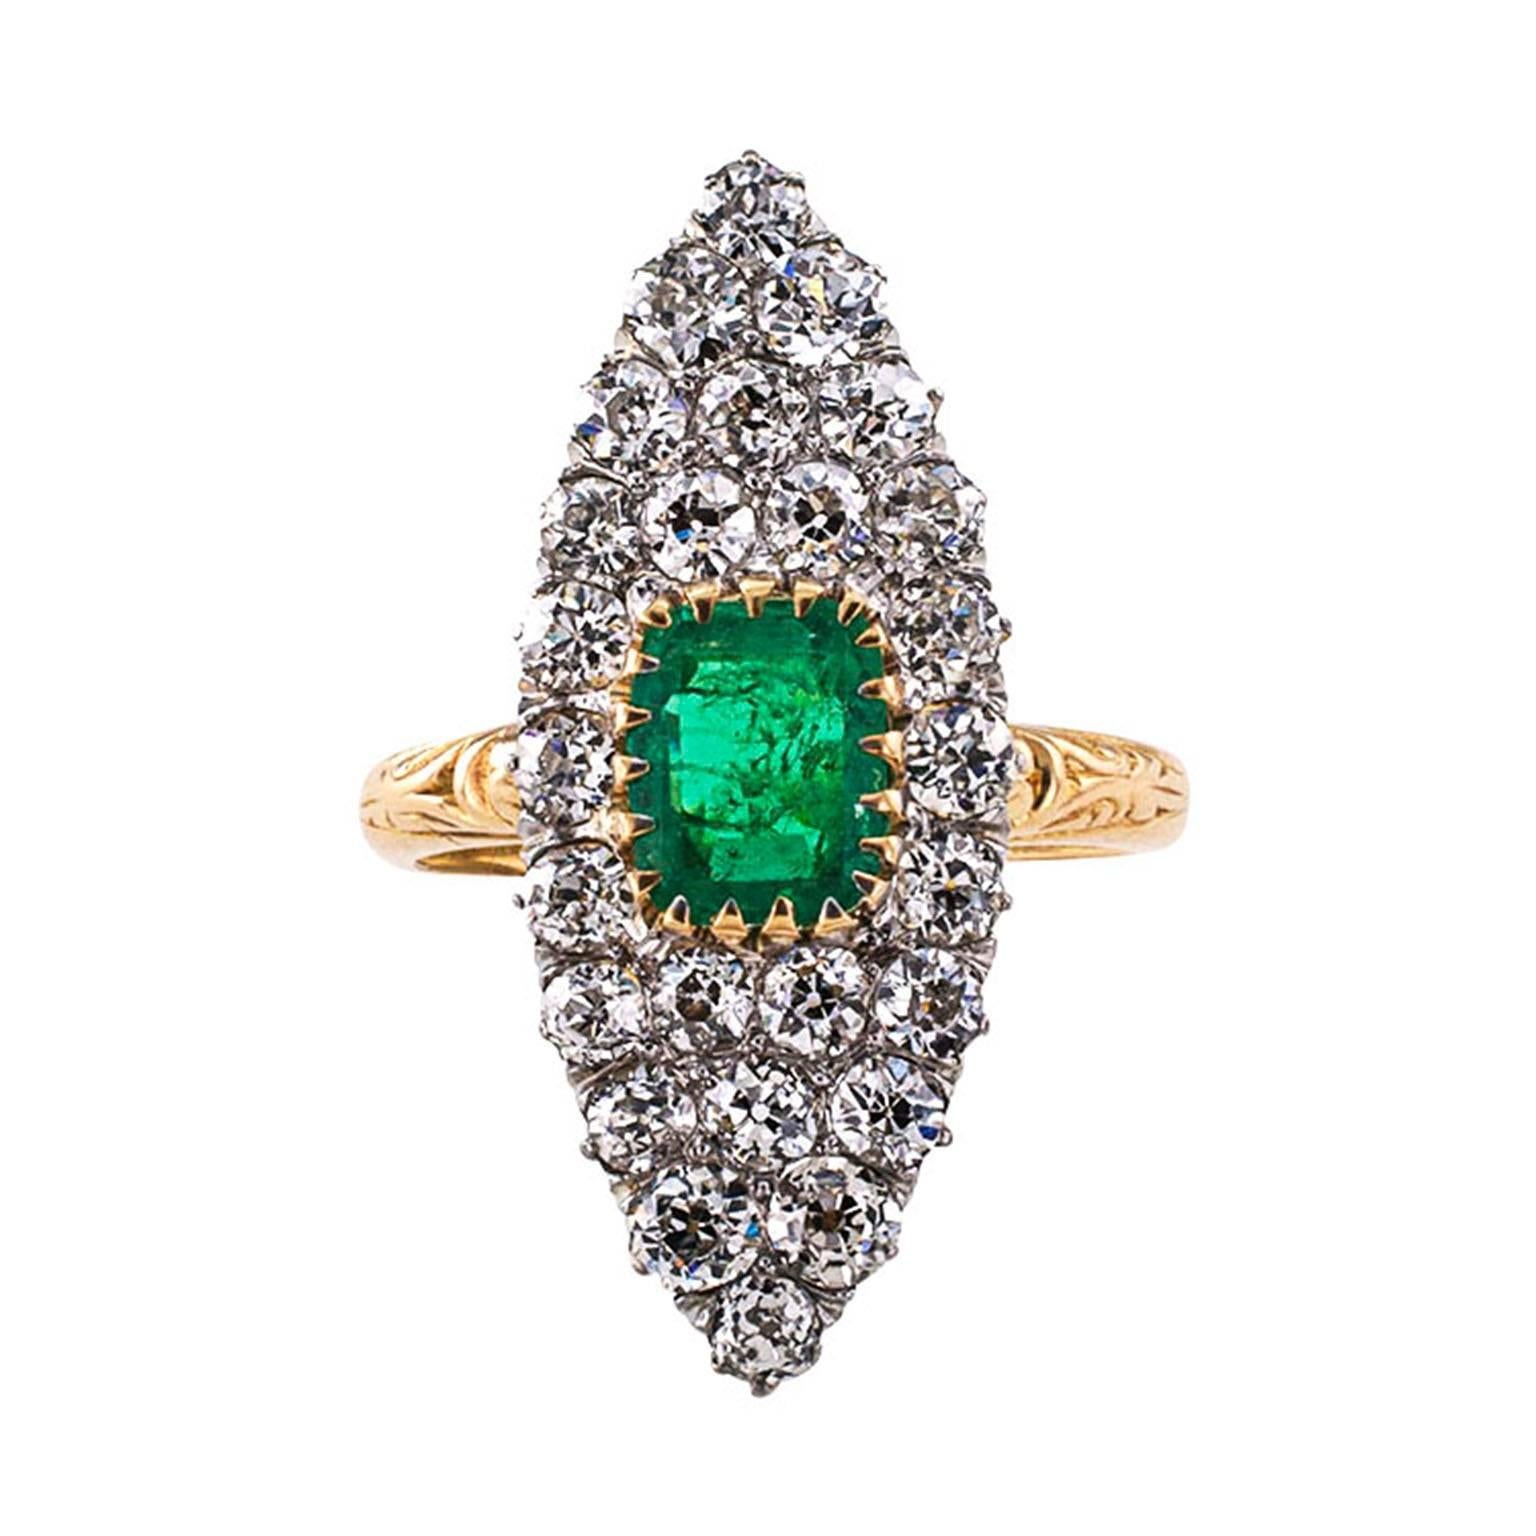 Edwardian Emerald and Diamond Ring

So much exhilaration and happiness contained in the simple navette shaped design as old diamonds shimmer and cuddle tightly around the old emerald cut Emerald displaying its beautiful color as it rests within